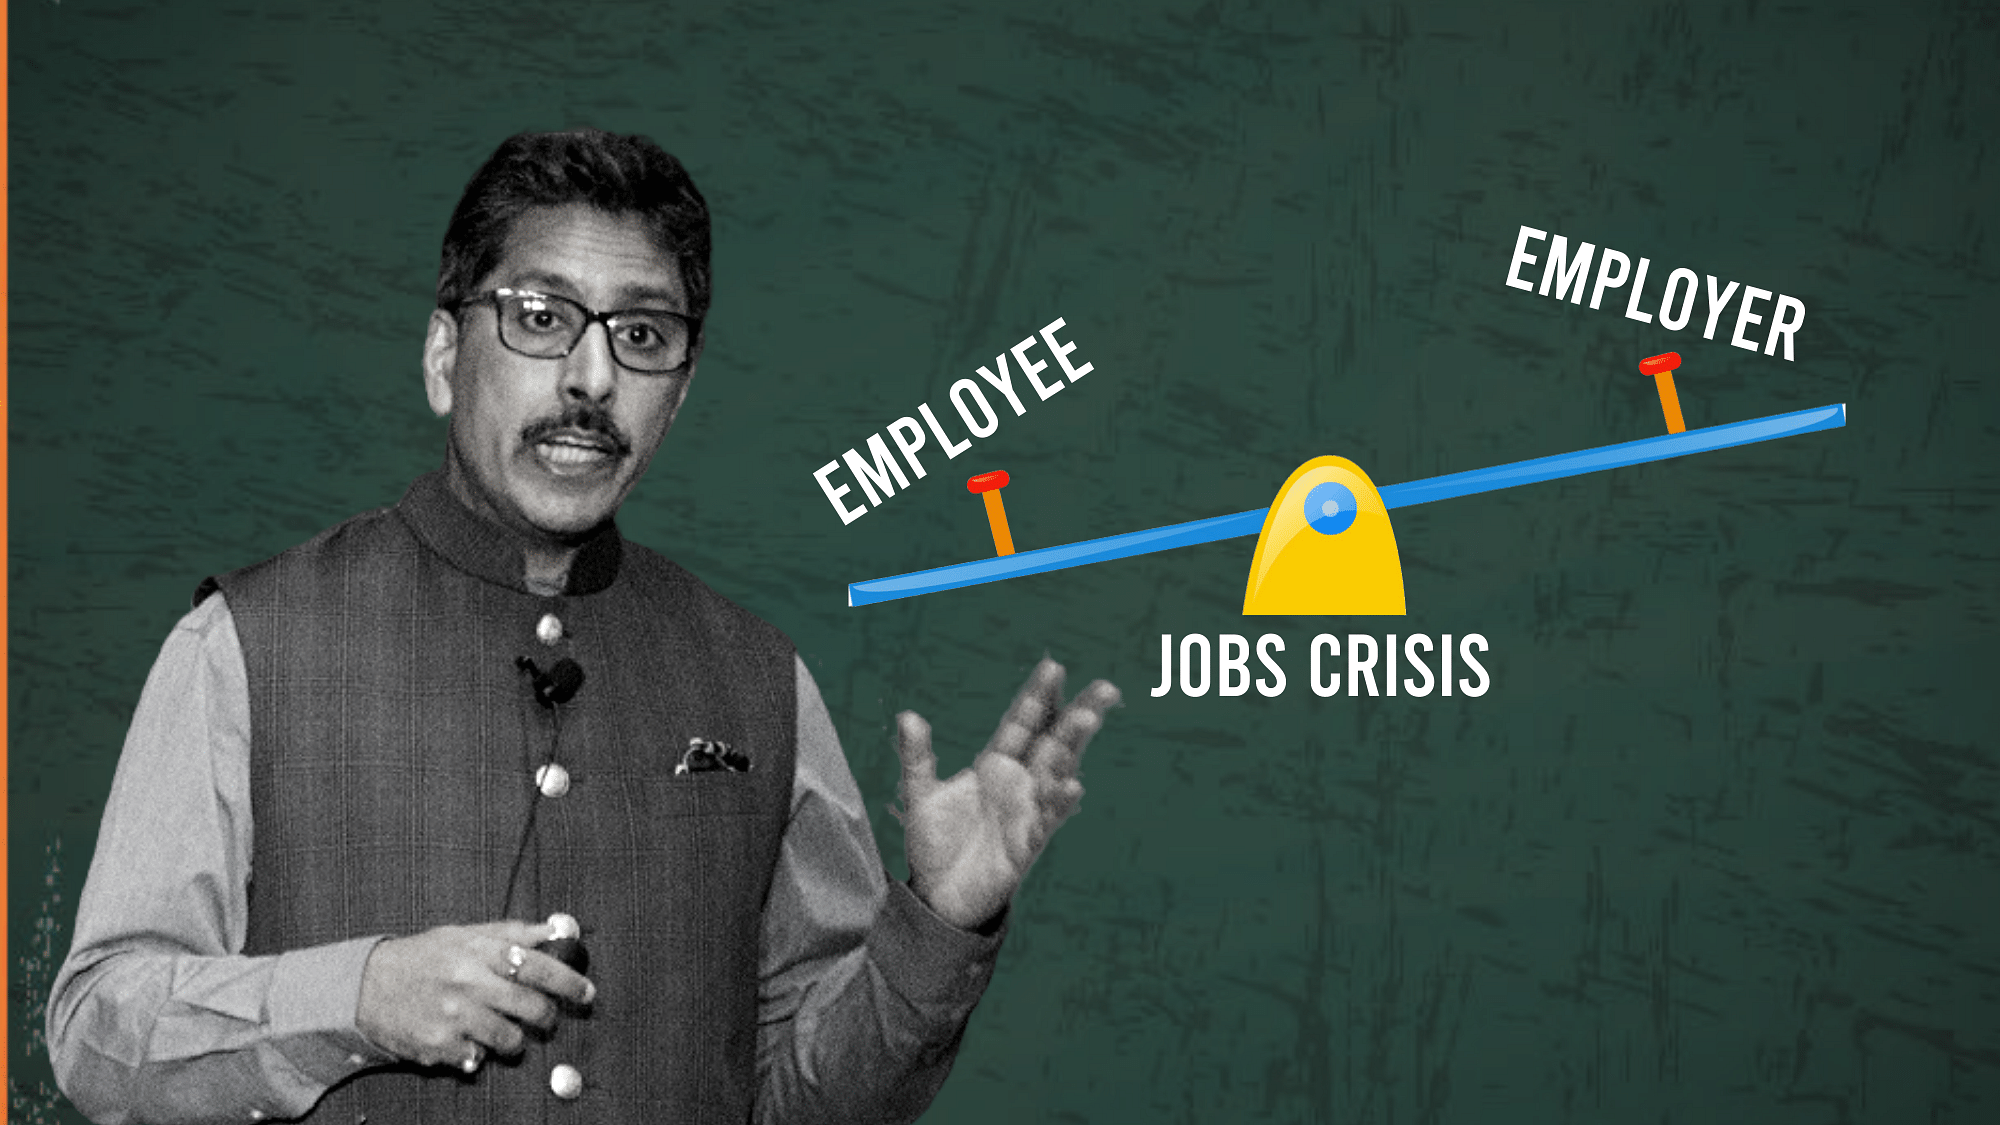 As the economic crisis triggered by the coronavirus pandemic unfolds, HR strategist Prabir Jha lists out suggestions for employers, employees and those who get laid off.